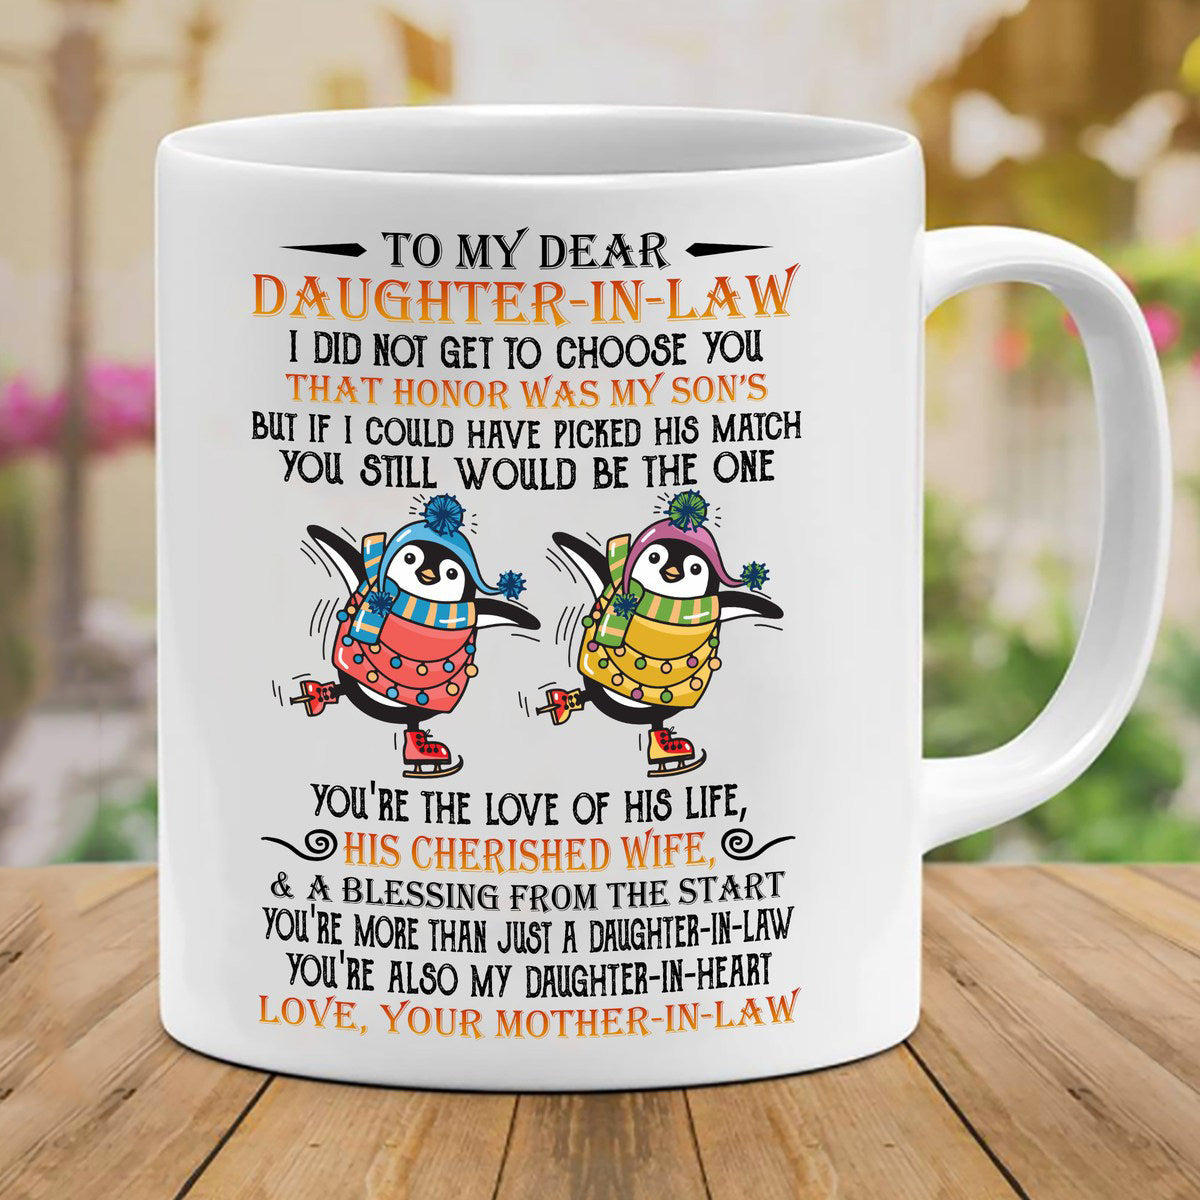 Thank You For Not Selling Him To The Circus - Best Gift For Daughter-in-law Mugs